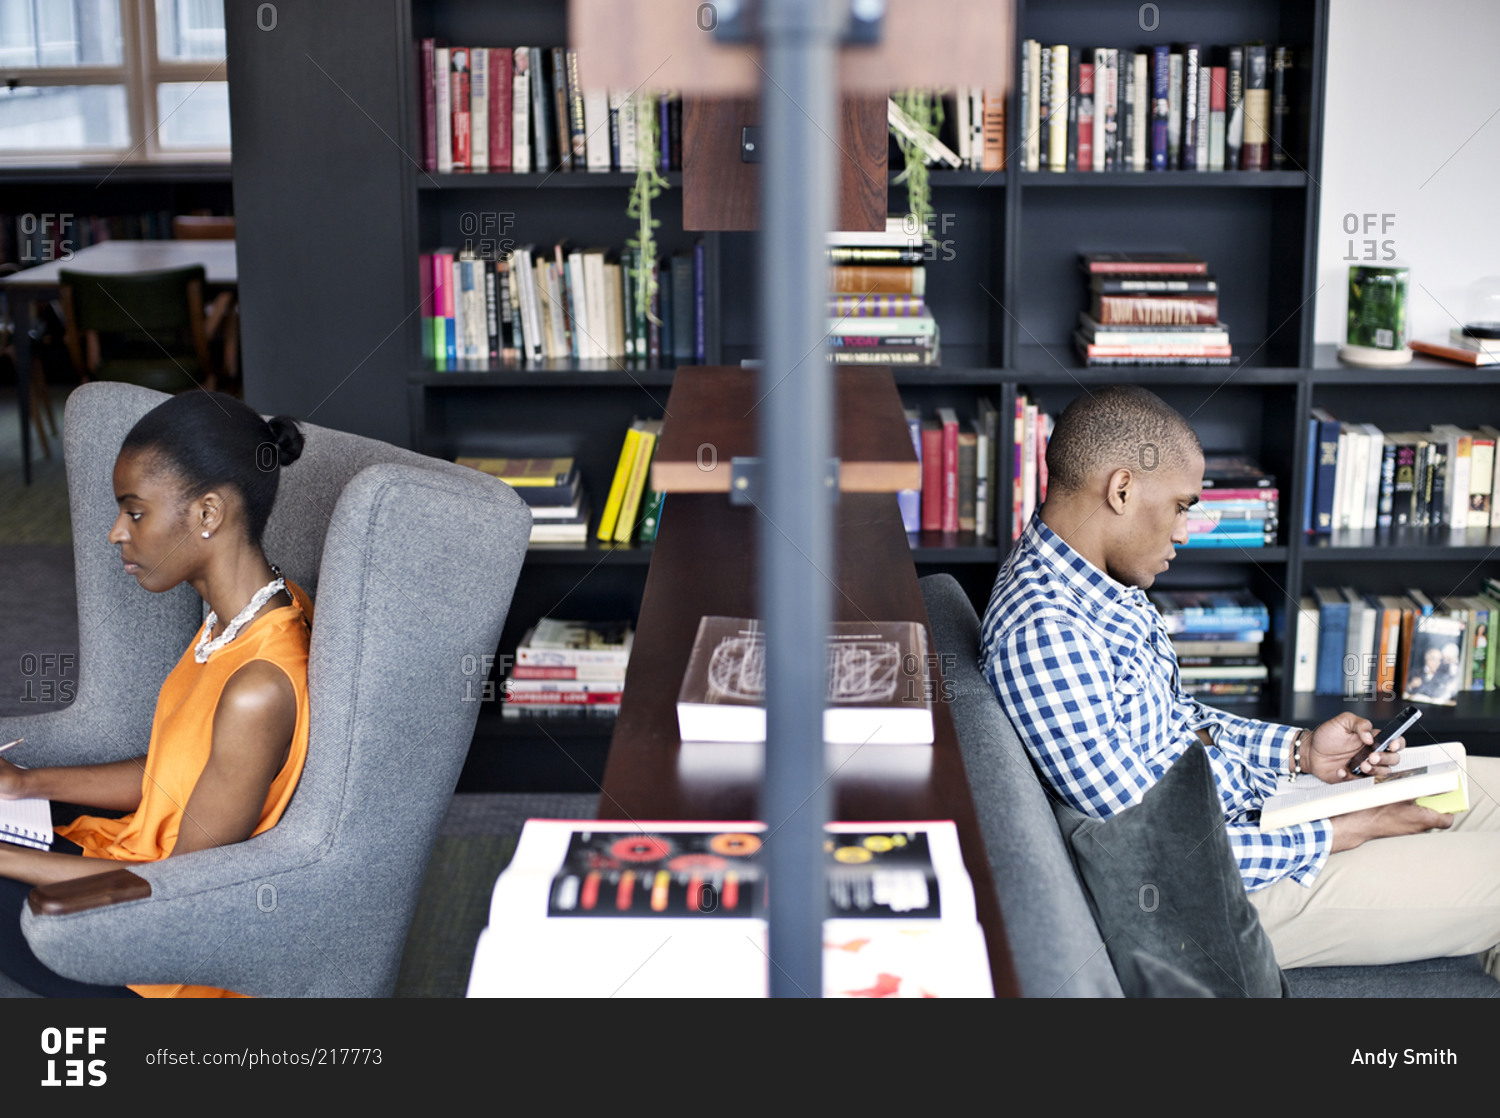 Two people work in a common space in an open office